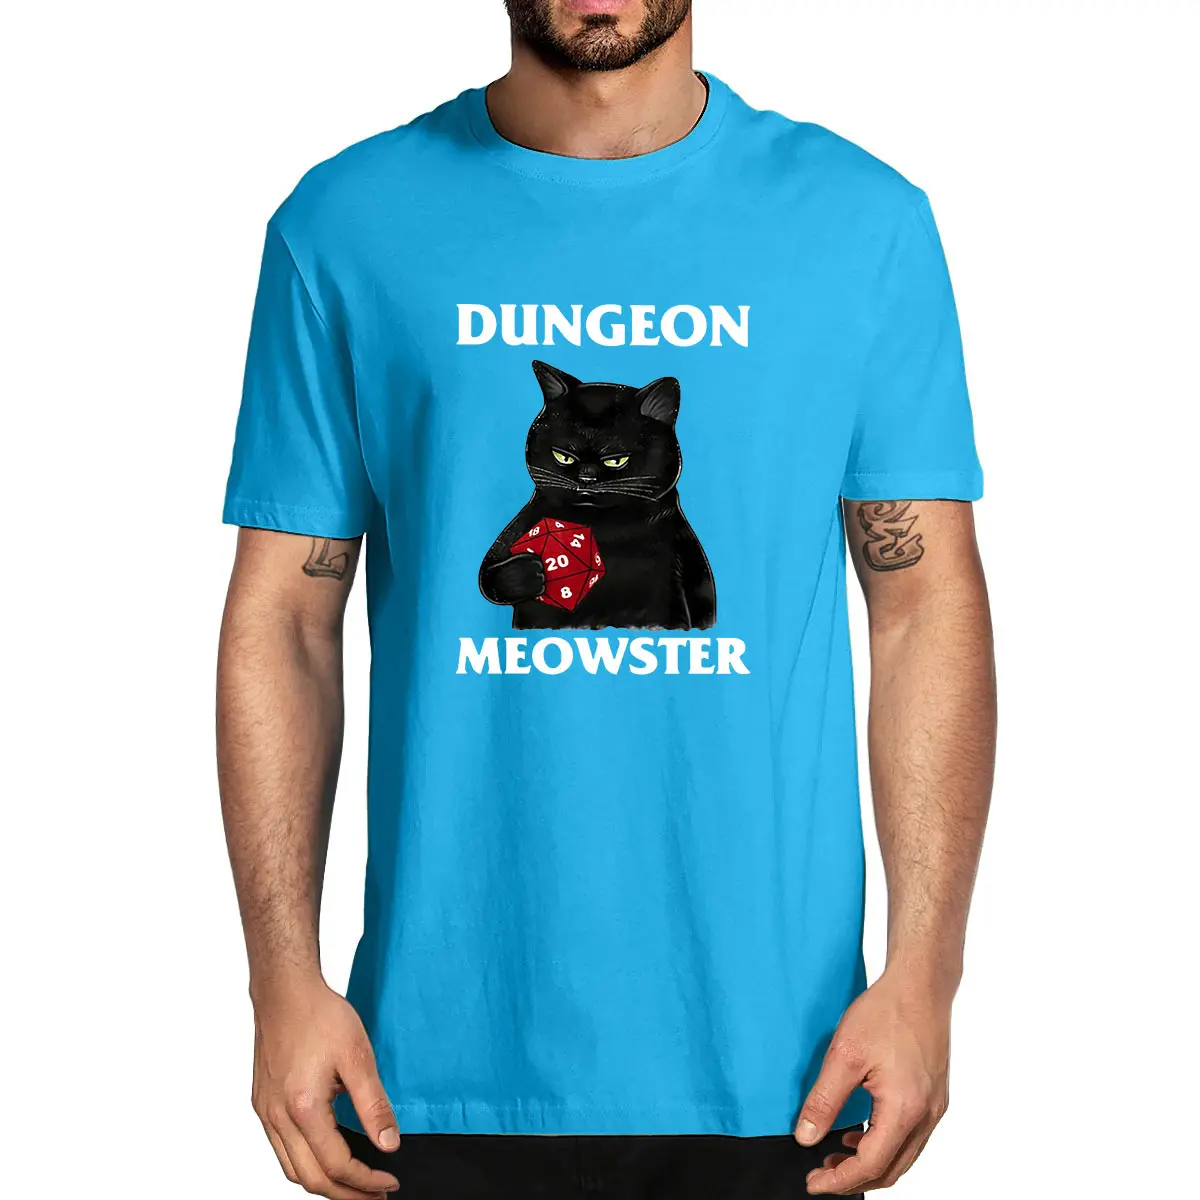 

Dungeon Meowster Black Cat Game Funny Vintage Men's 100% Cotton Novelty T-Shirt Unisex Humor Streetwear Women Soft Top Tee